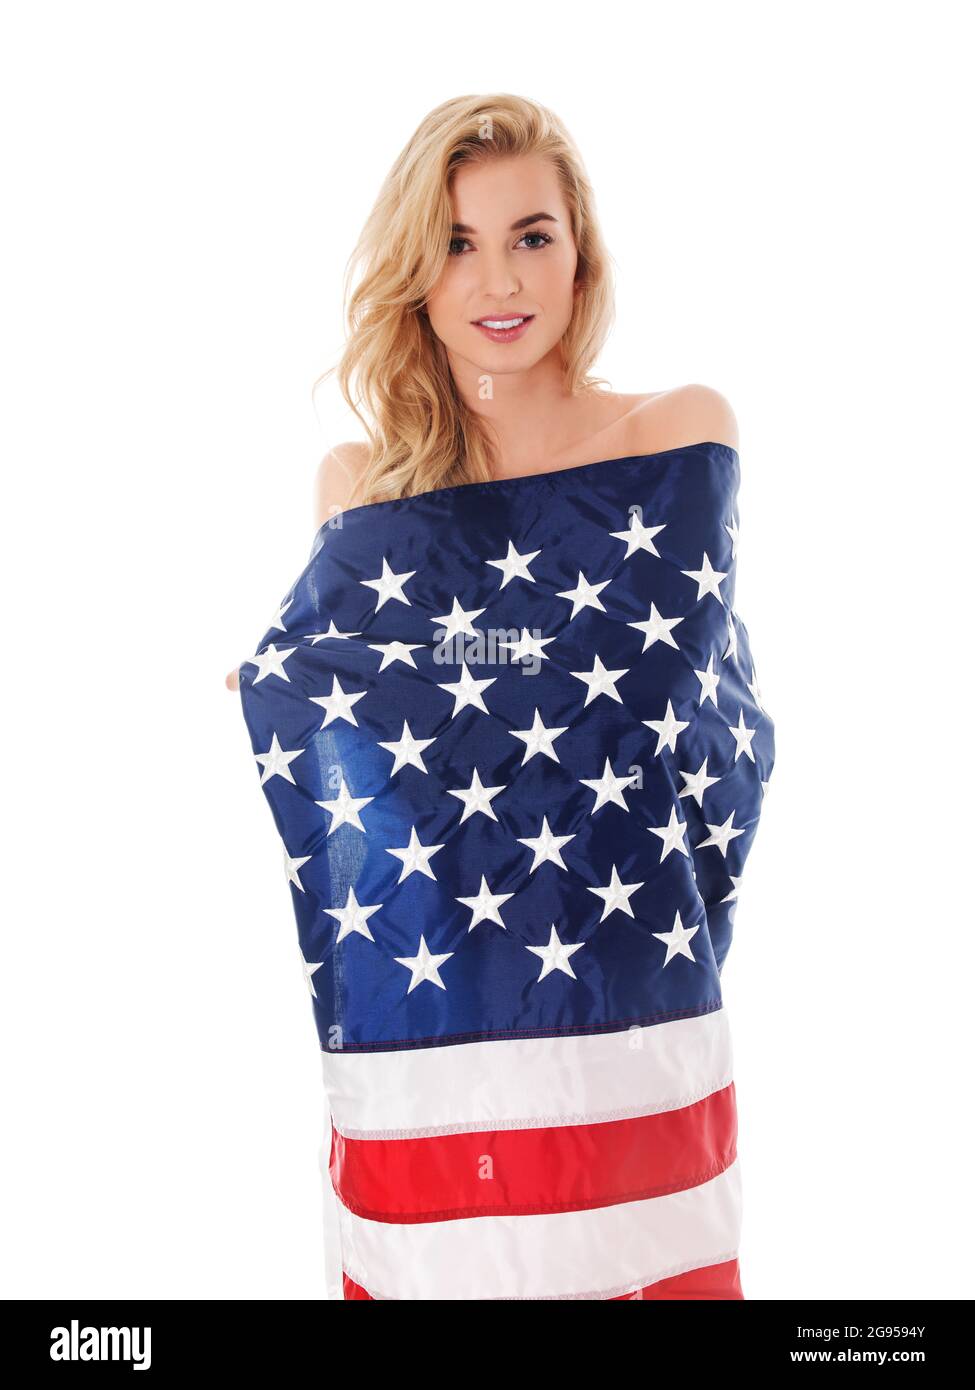 Beautiful blond woman wrapped only in an American flag. Stock Photo